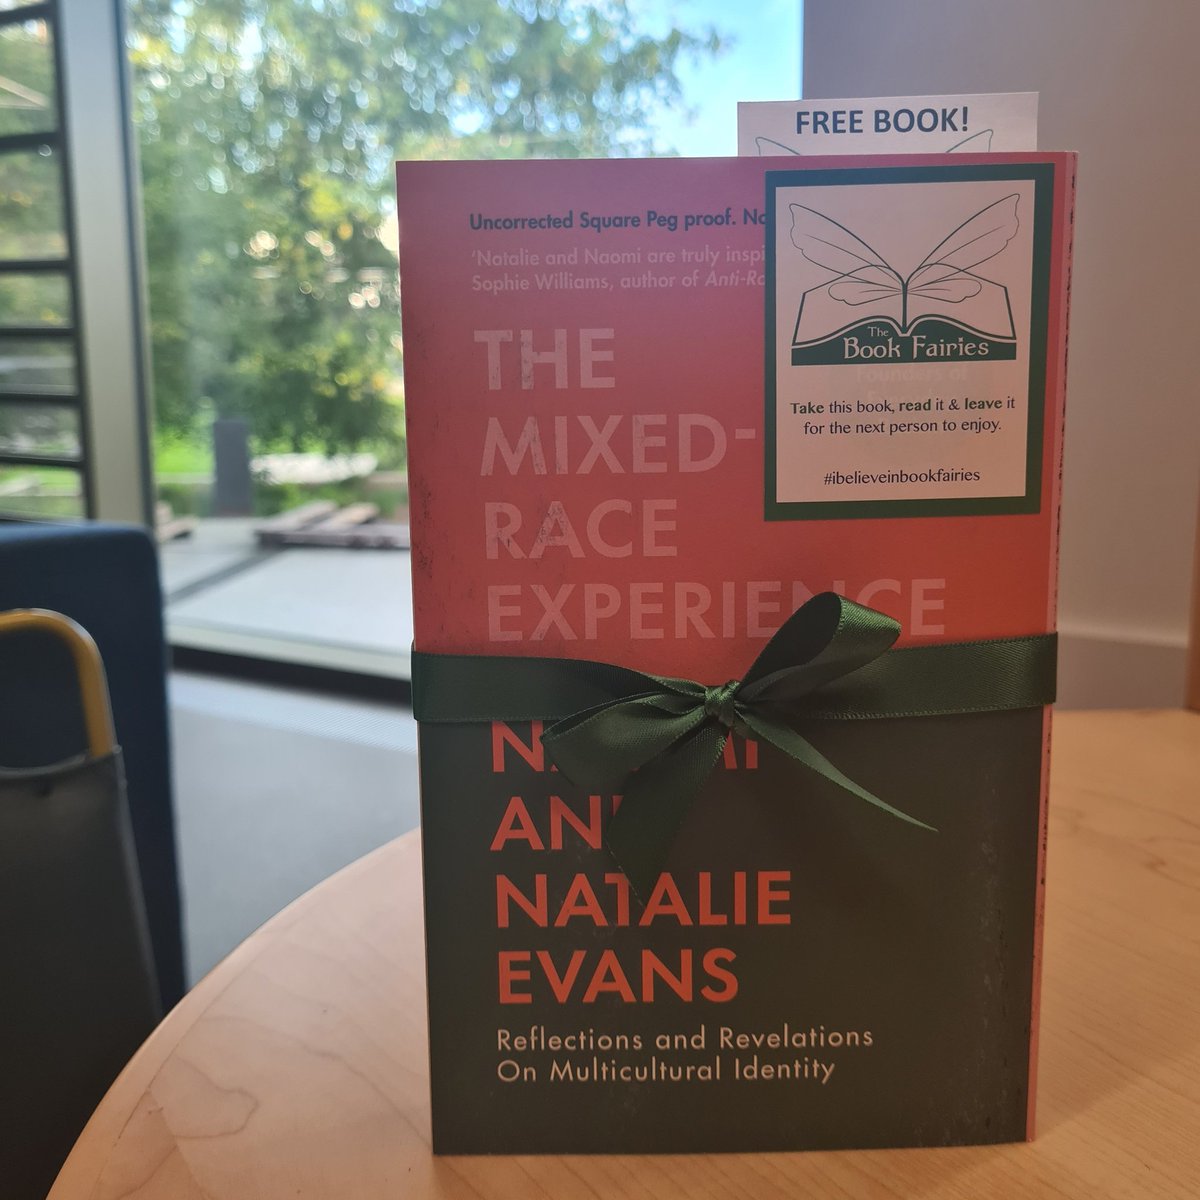 A copy of The Mixed Race Experience by Naomi and Natalie Evans has been hidden at the University of Stirling. Will you be the lucky finder? #ibelieveinbookfairies #VintageBookFairies #BookFairyProofs #TheMixedRaceExperience #BLMBookFairies